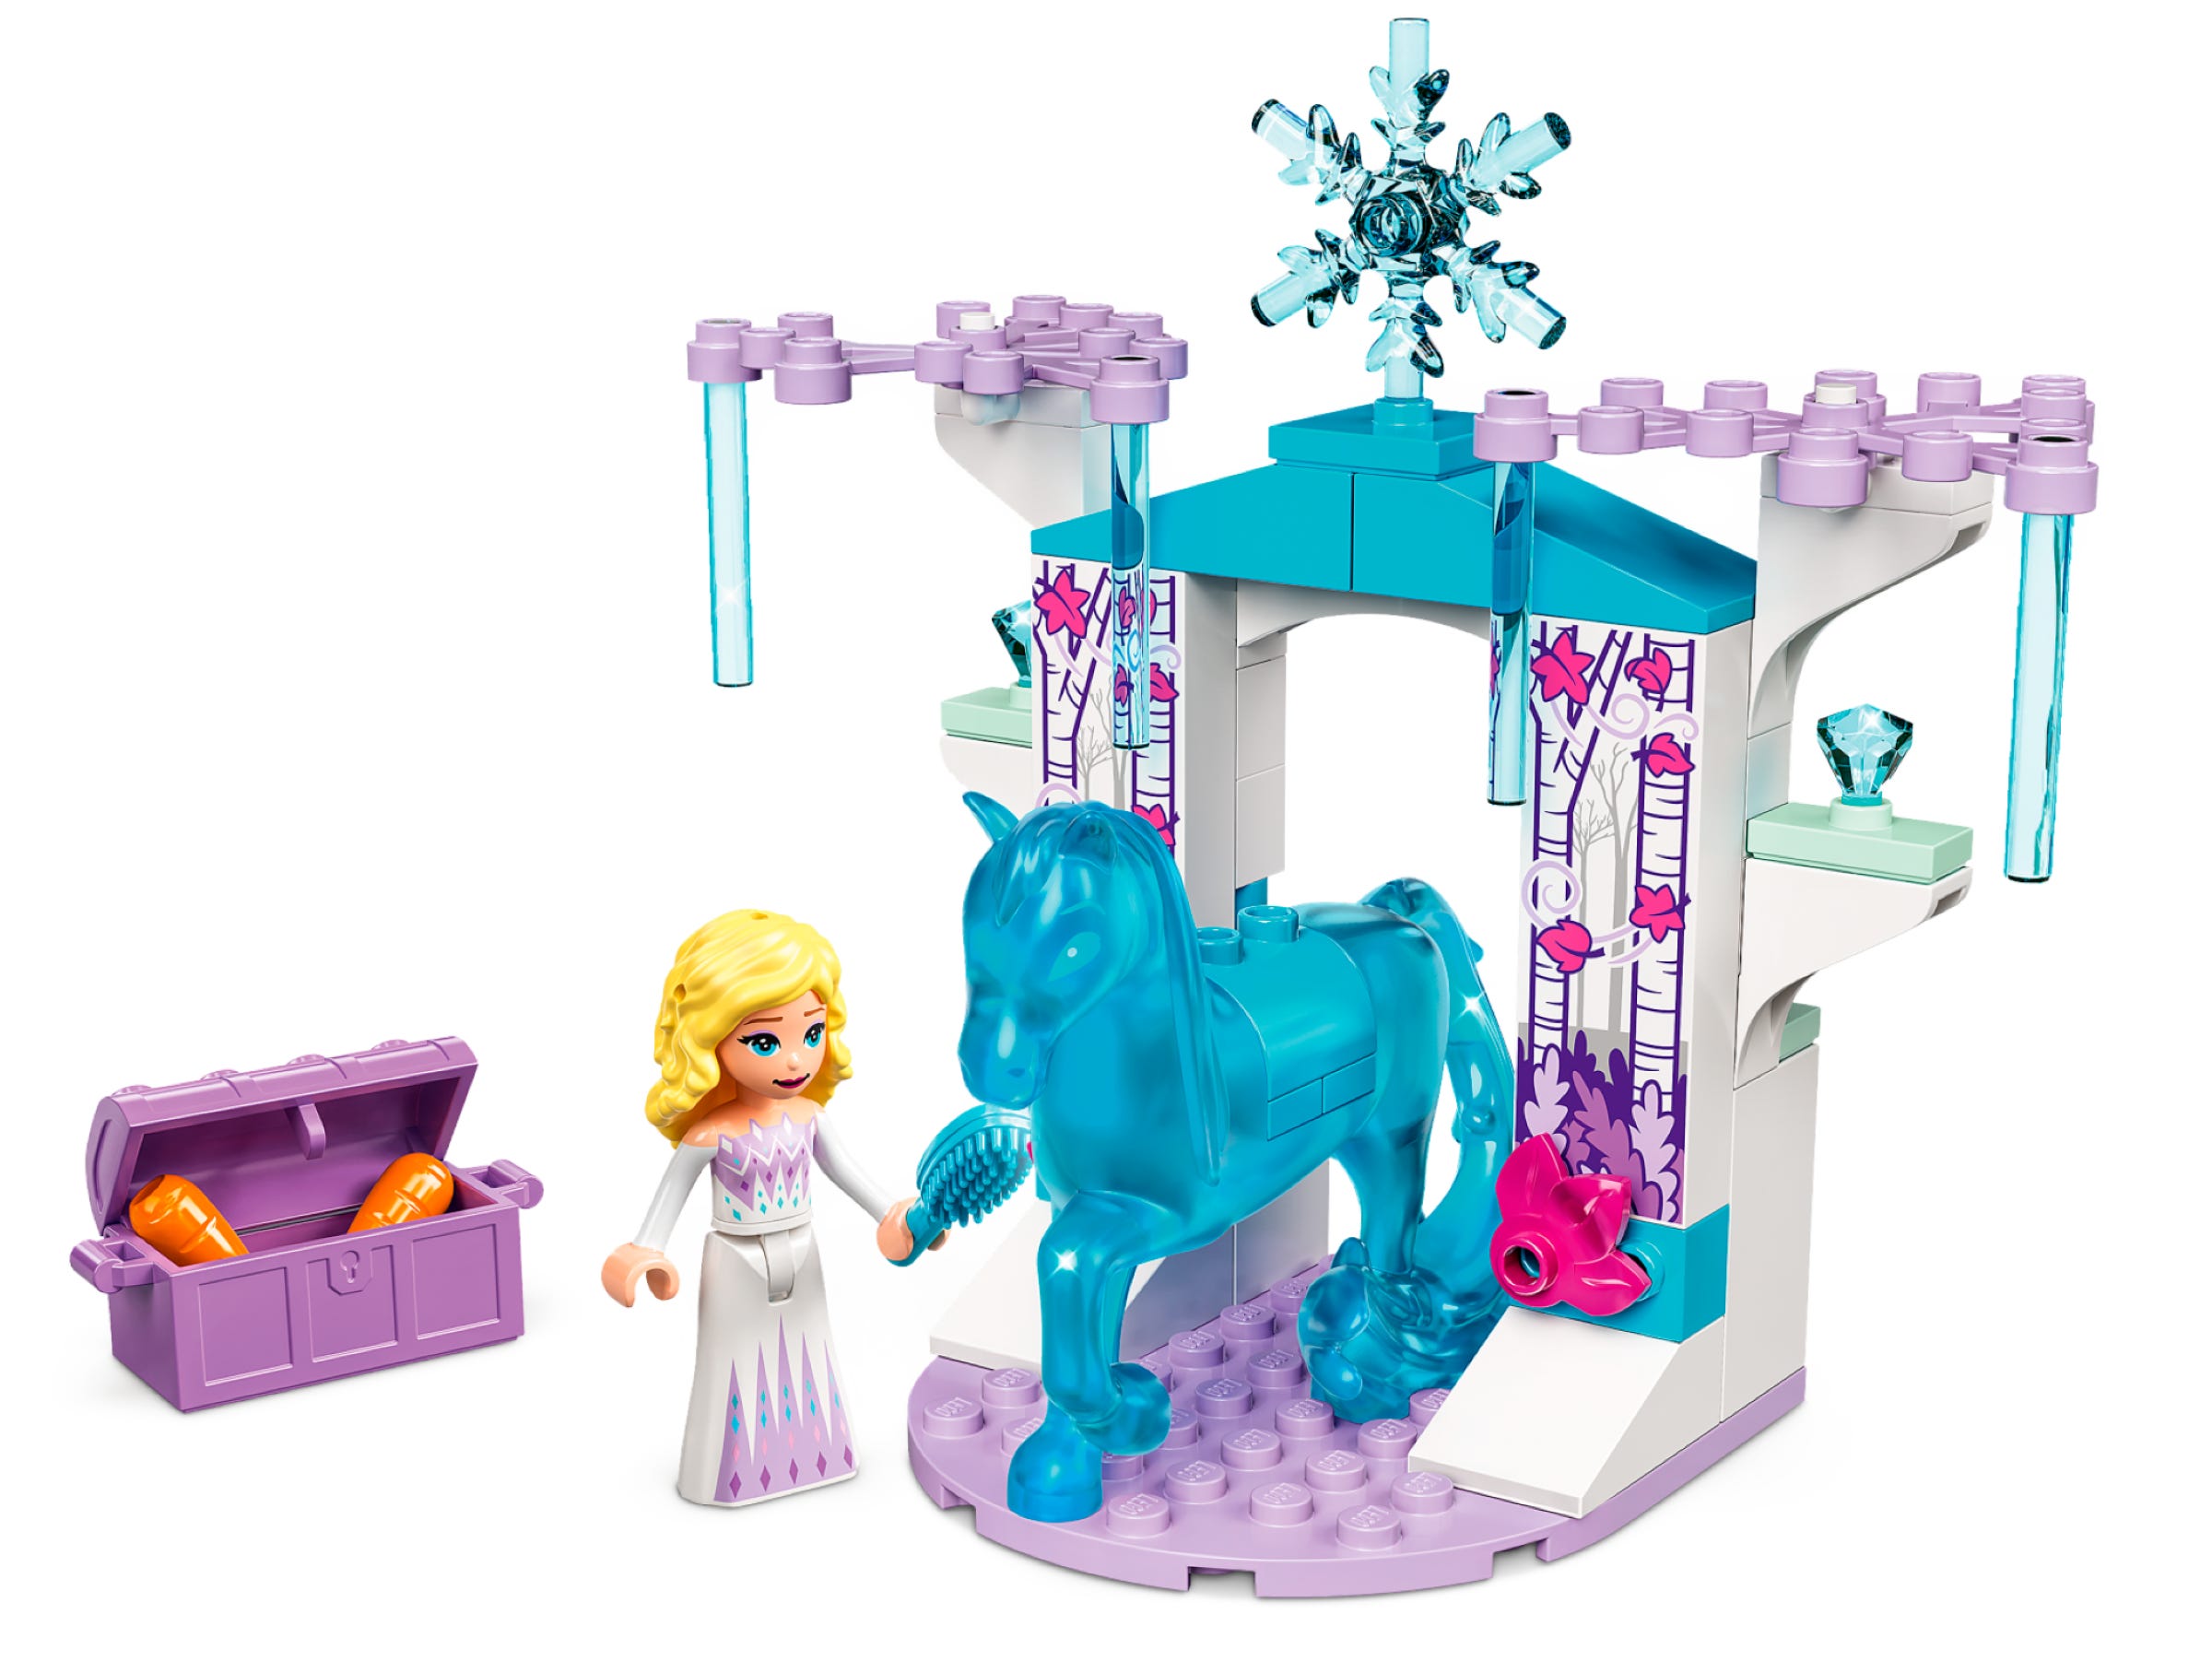 Elsa and the Nokk s Ice Stable